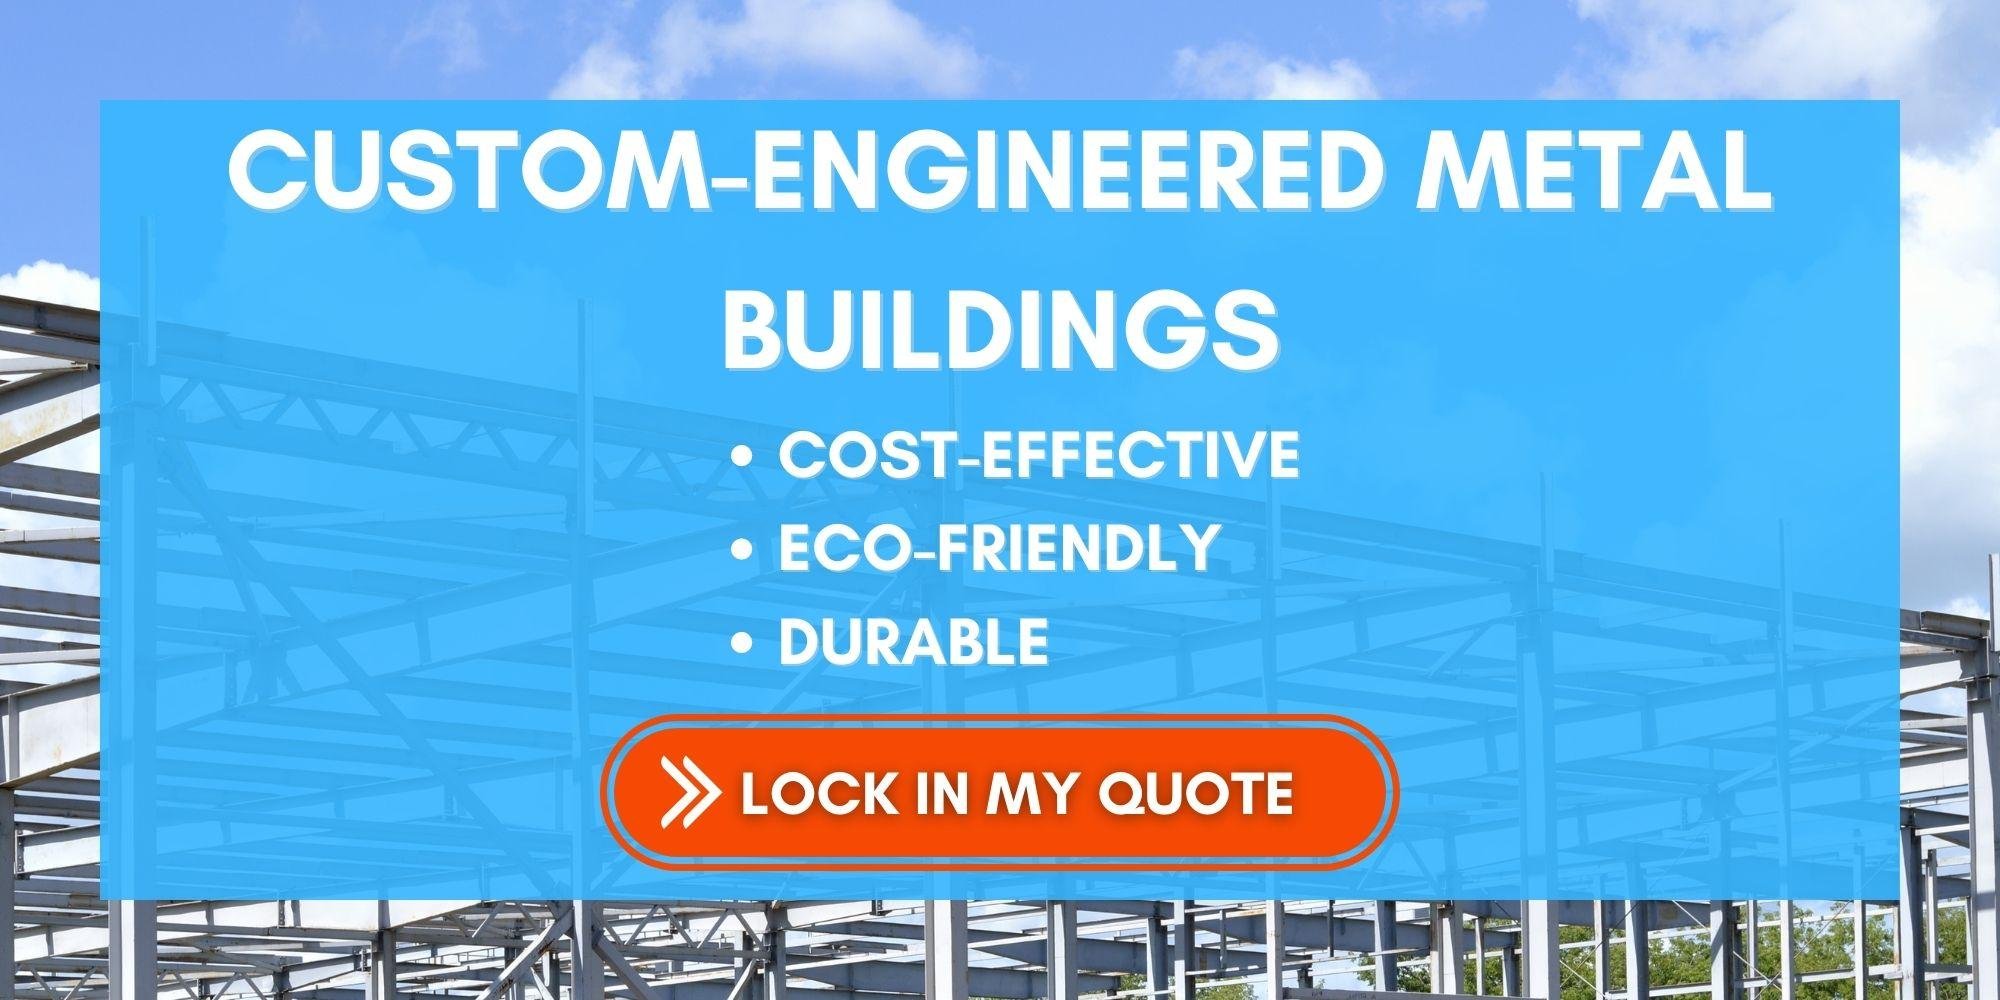 get-your-pre-engineered-steel-building-quote-with-cdmg